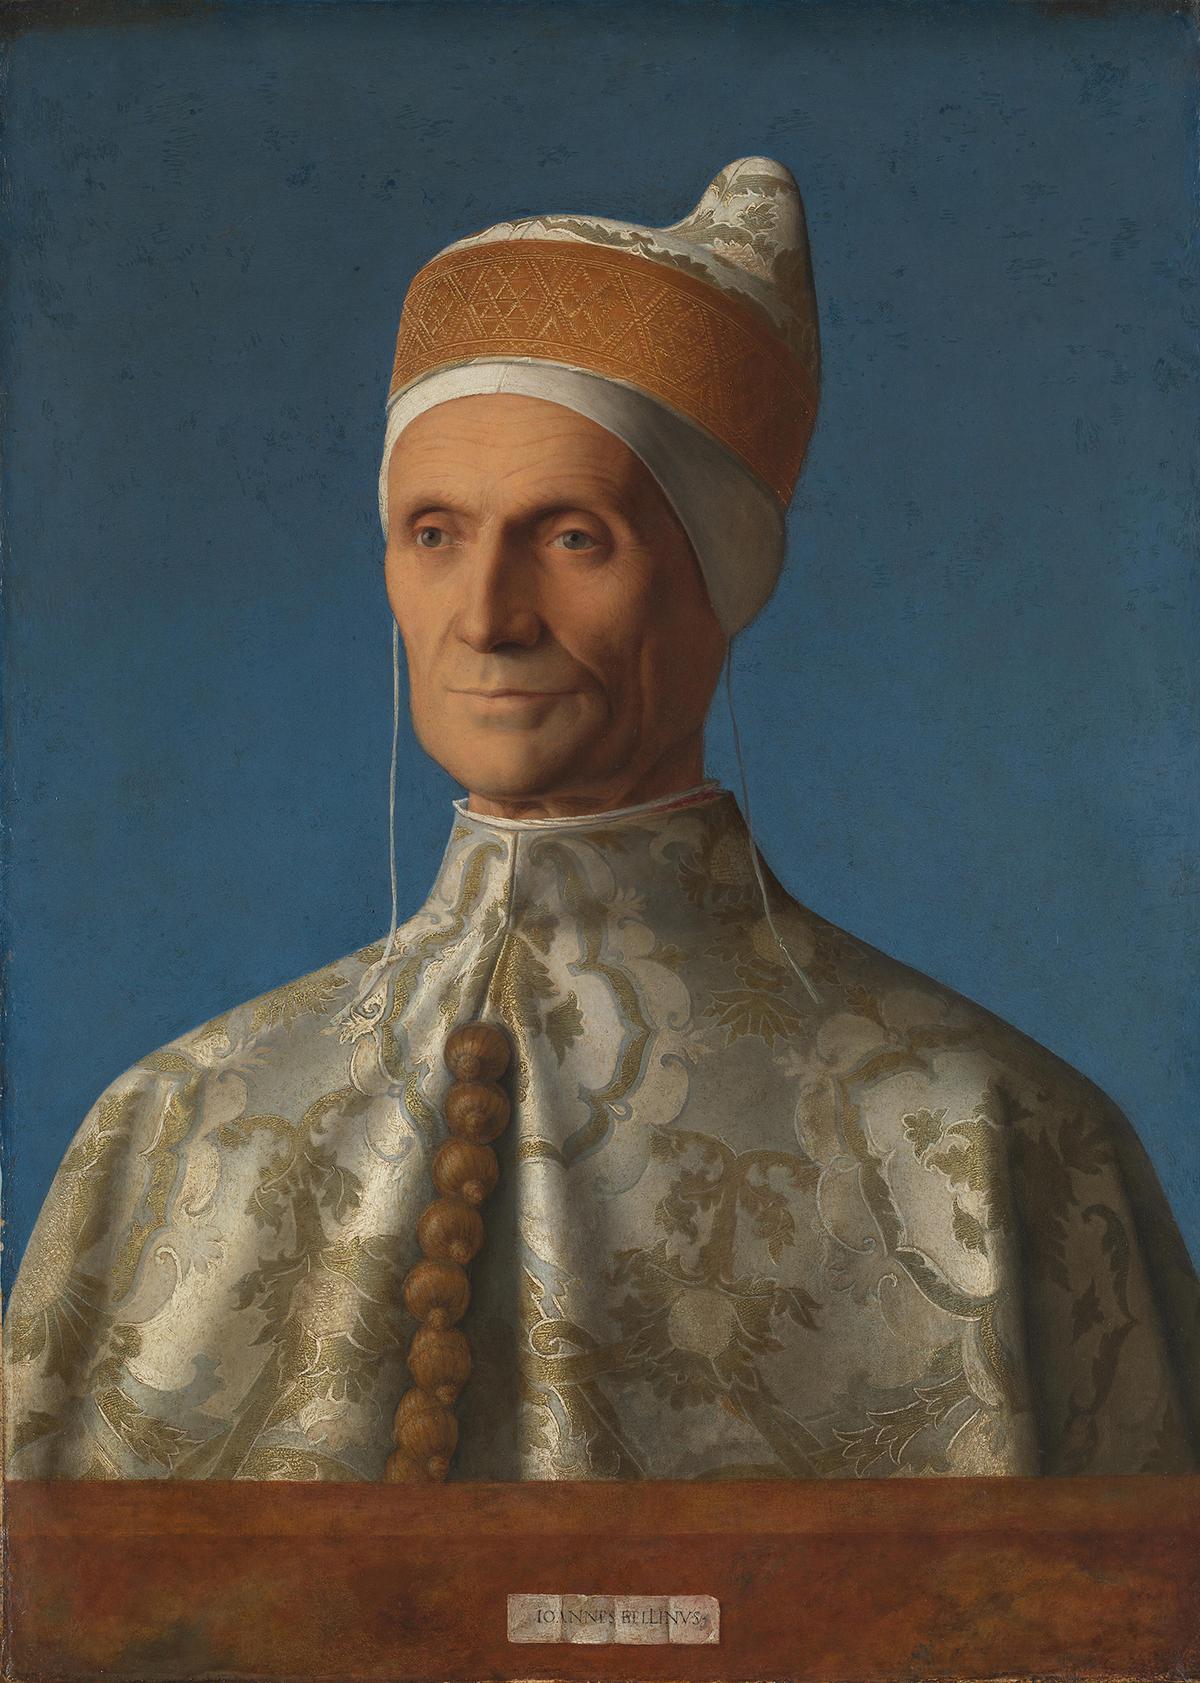 Bellini’s mastery of oil paint and subtle blending of color resulted in convincing tonal transitions for the doge’s flesh. Portrait of Doge Leonardo Loredan, circa 1501–1502, by Giovanni Bellini. Oil on poplar wood. The National Gallery, London. (Public Domain)